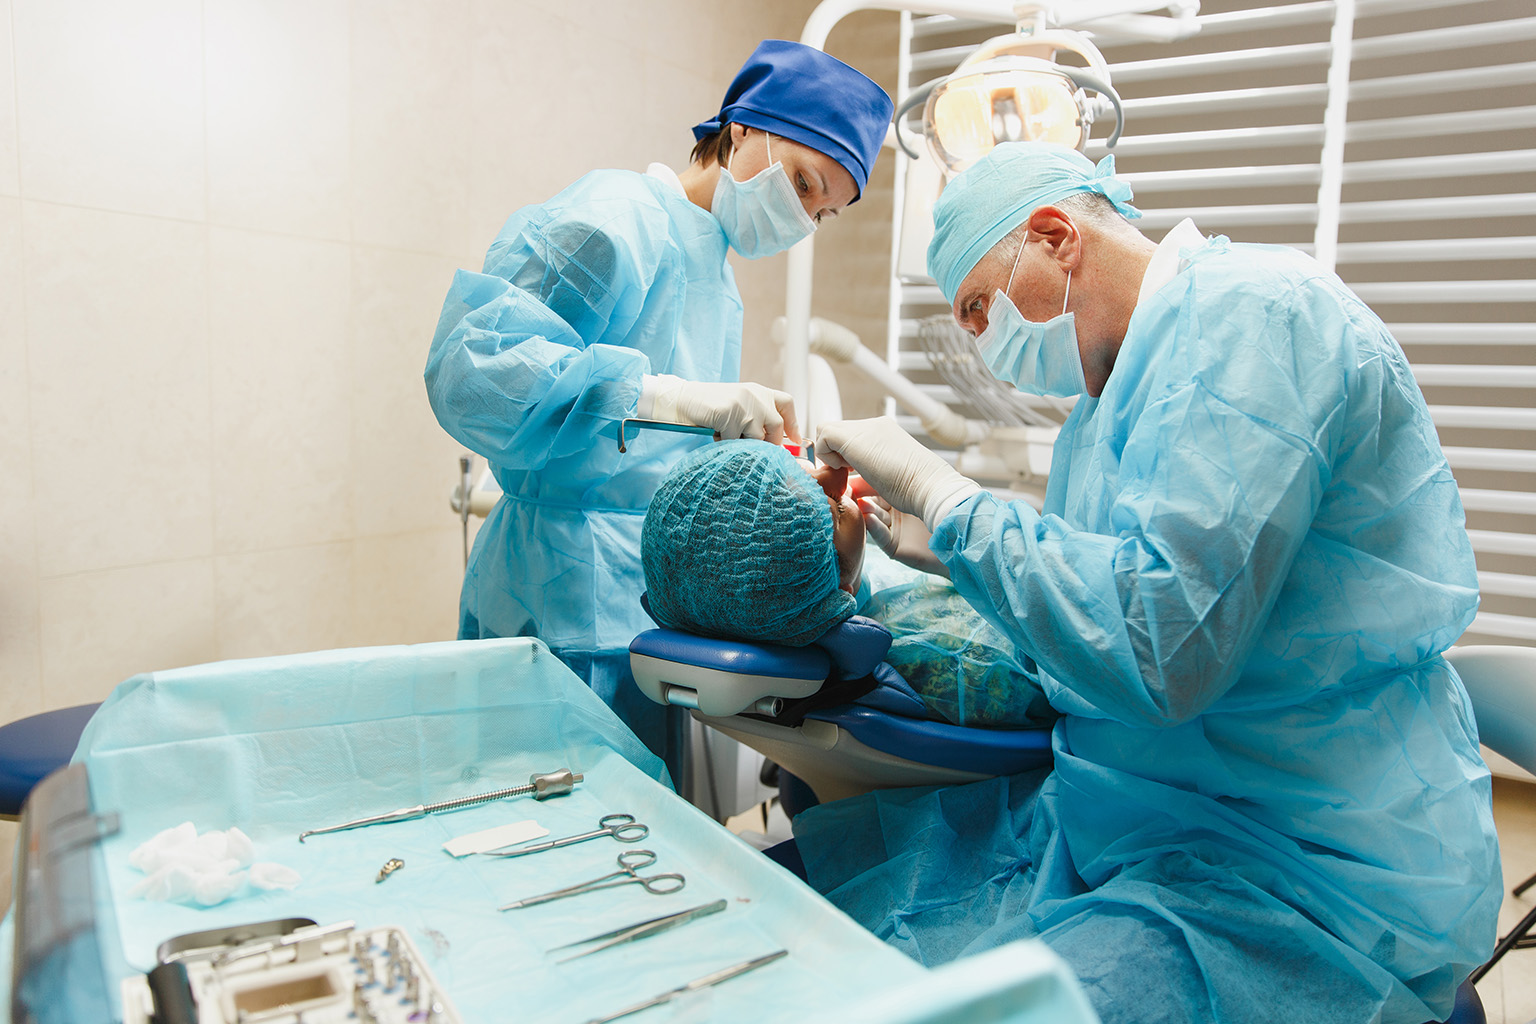 dental staff treating patient with dental tools in the foreground